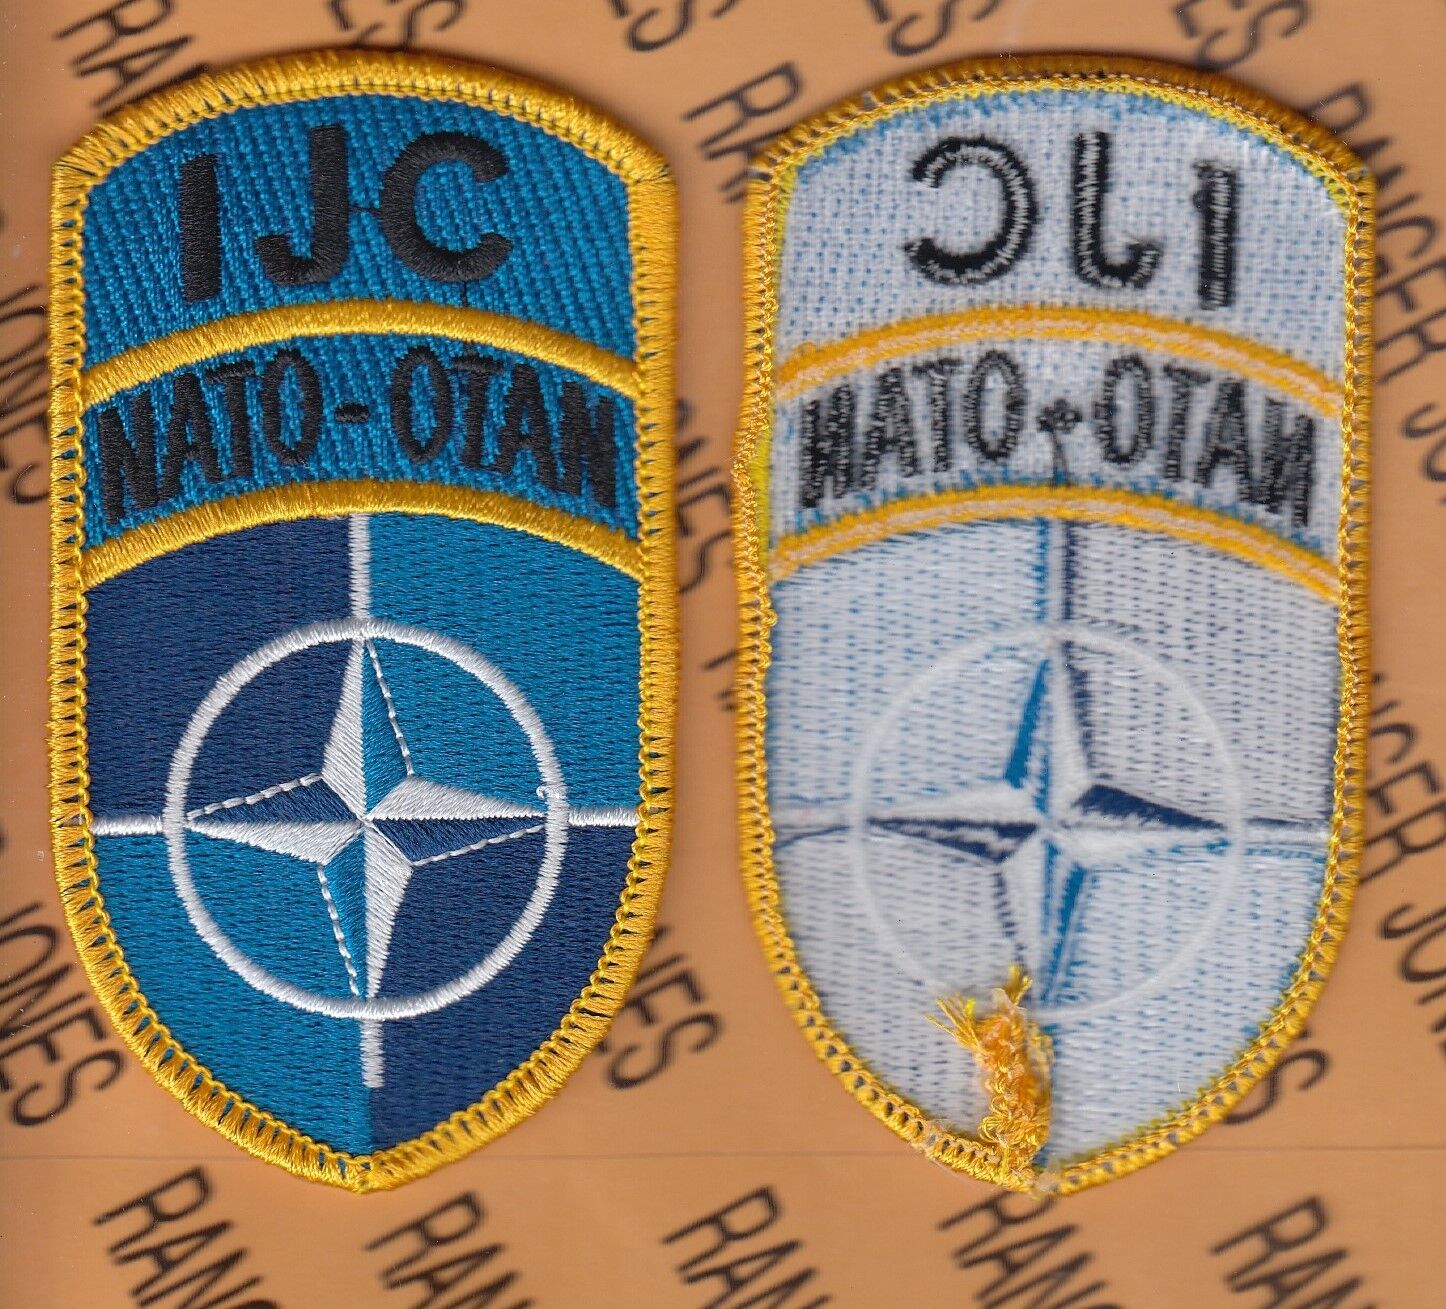 U.S Army Element NATO International Joint Command IJC Afghanistan patch m/e B